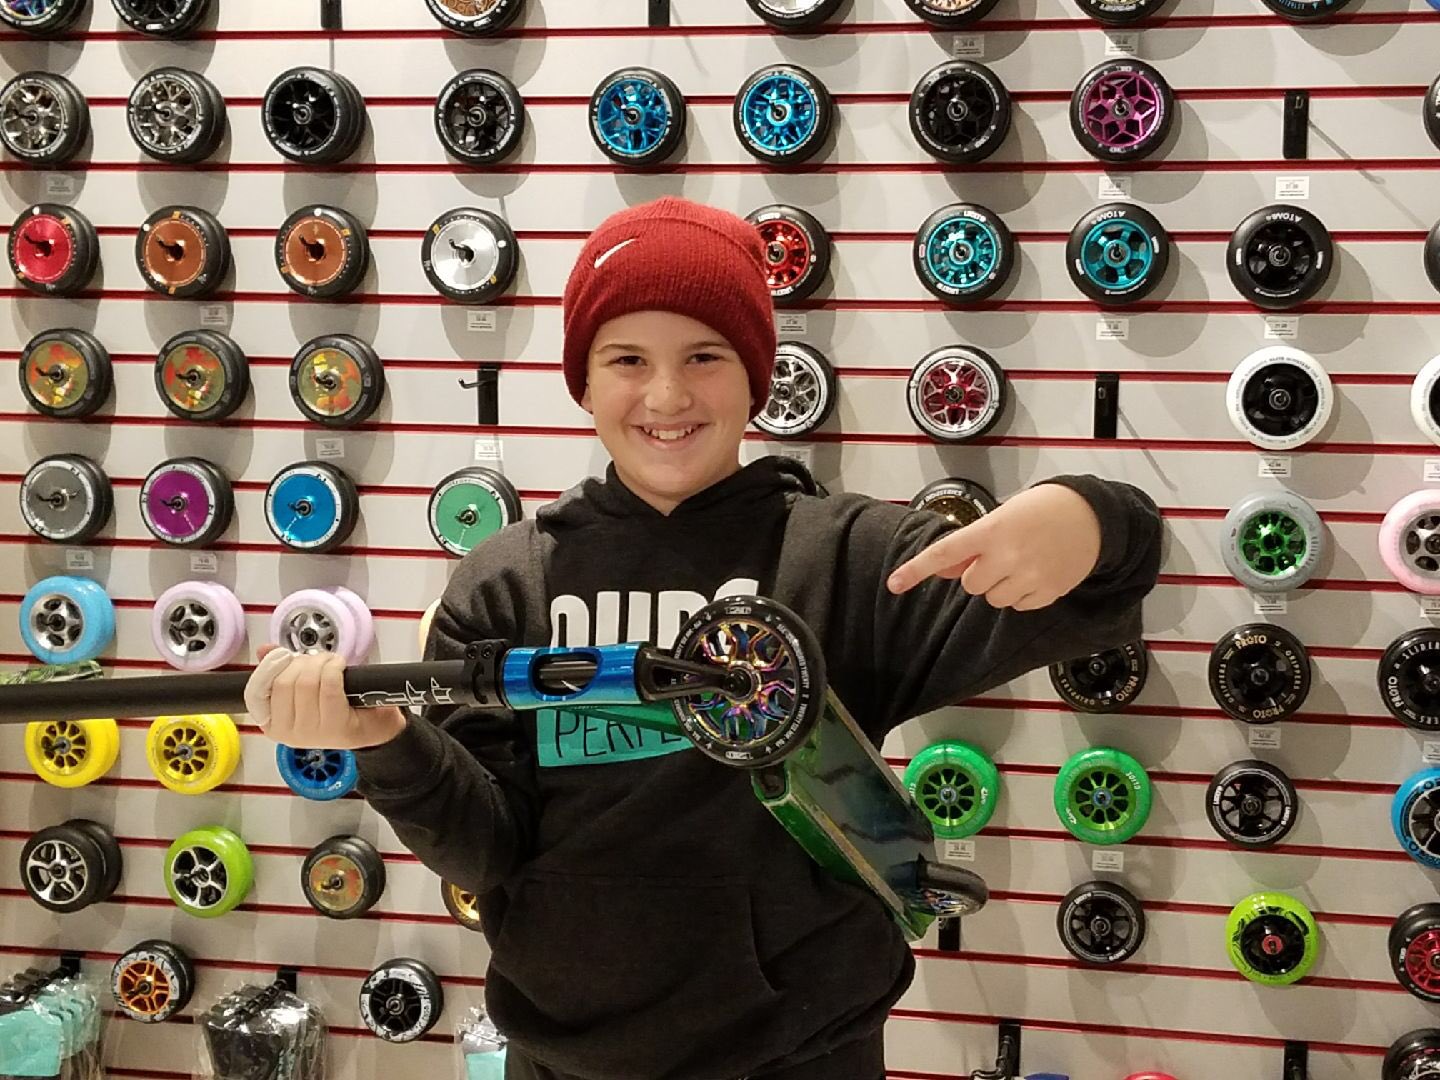 mager Forstad deadline Redi To Pedi on Twitter: "Envy Lambo Wheels for his Envy Prodigy Pro Scooter!  Get yours here in Orlando, Florida. #envyscooters #proscooters  https://t.co/cTyCIiYF83" / Twitter